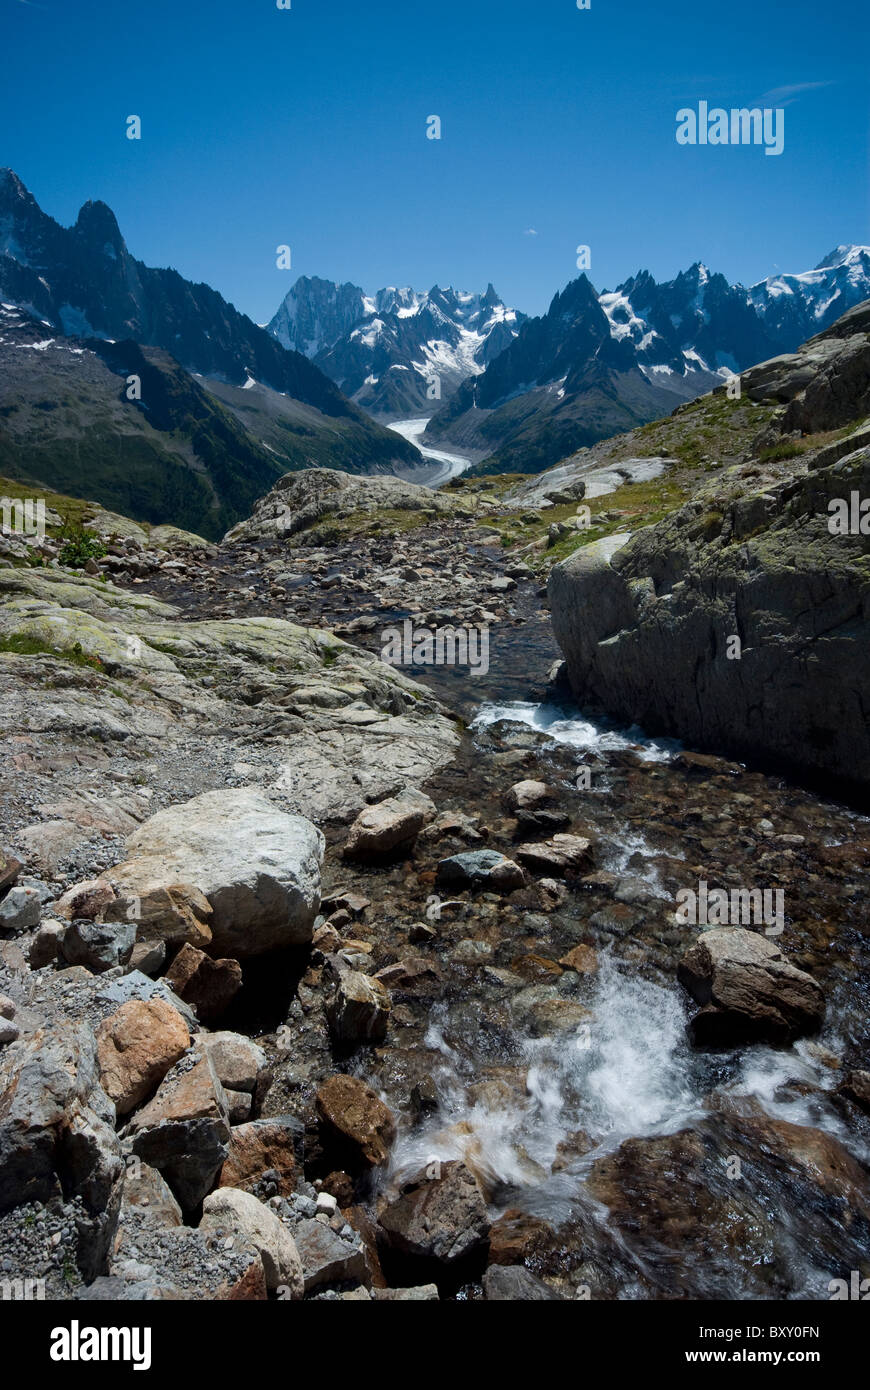 A river leads from Lac Blanc, opposite the peaks of Aiguille Verte and Mont Blanc, French Alps. Stock Photo